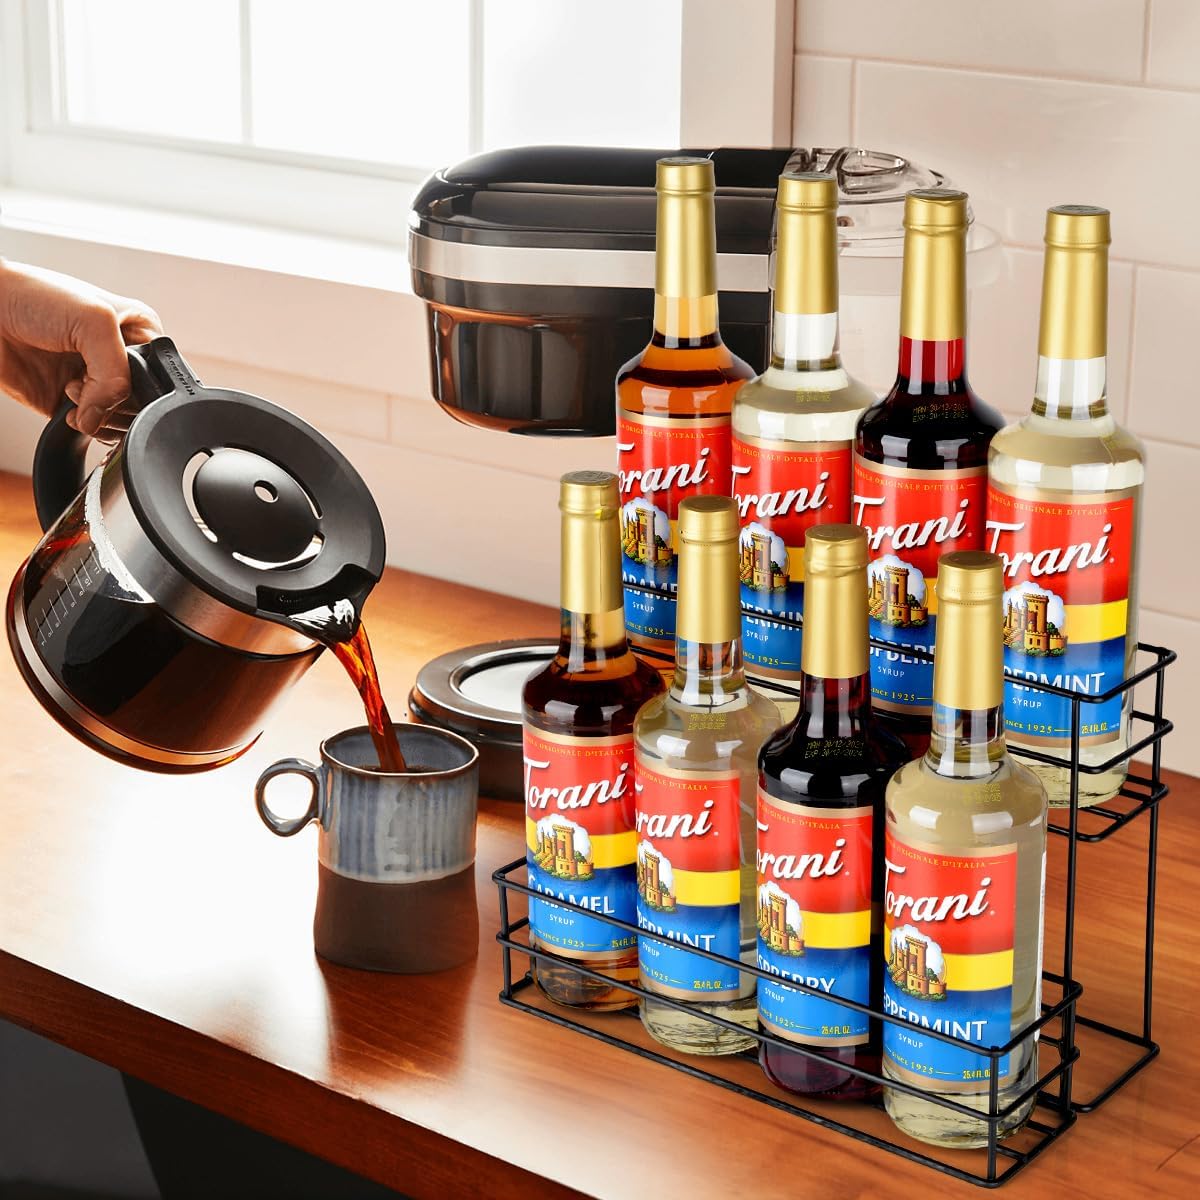 Coffee Syrup Rack for Coffee Bar Accessories, Fits with Torani and Monin Syrup, Coffee Bar Organizer Holds 4 Bottles